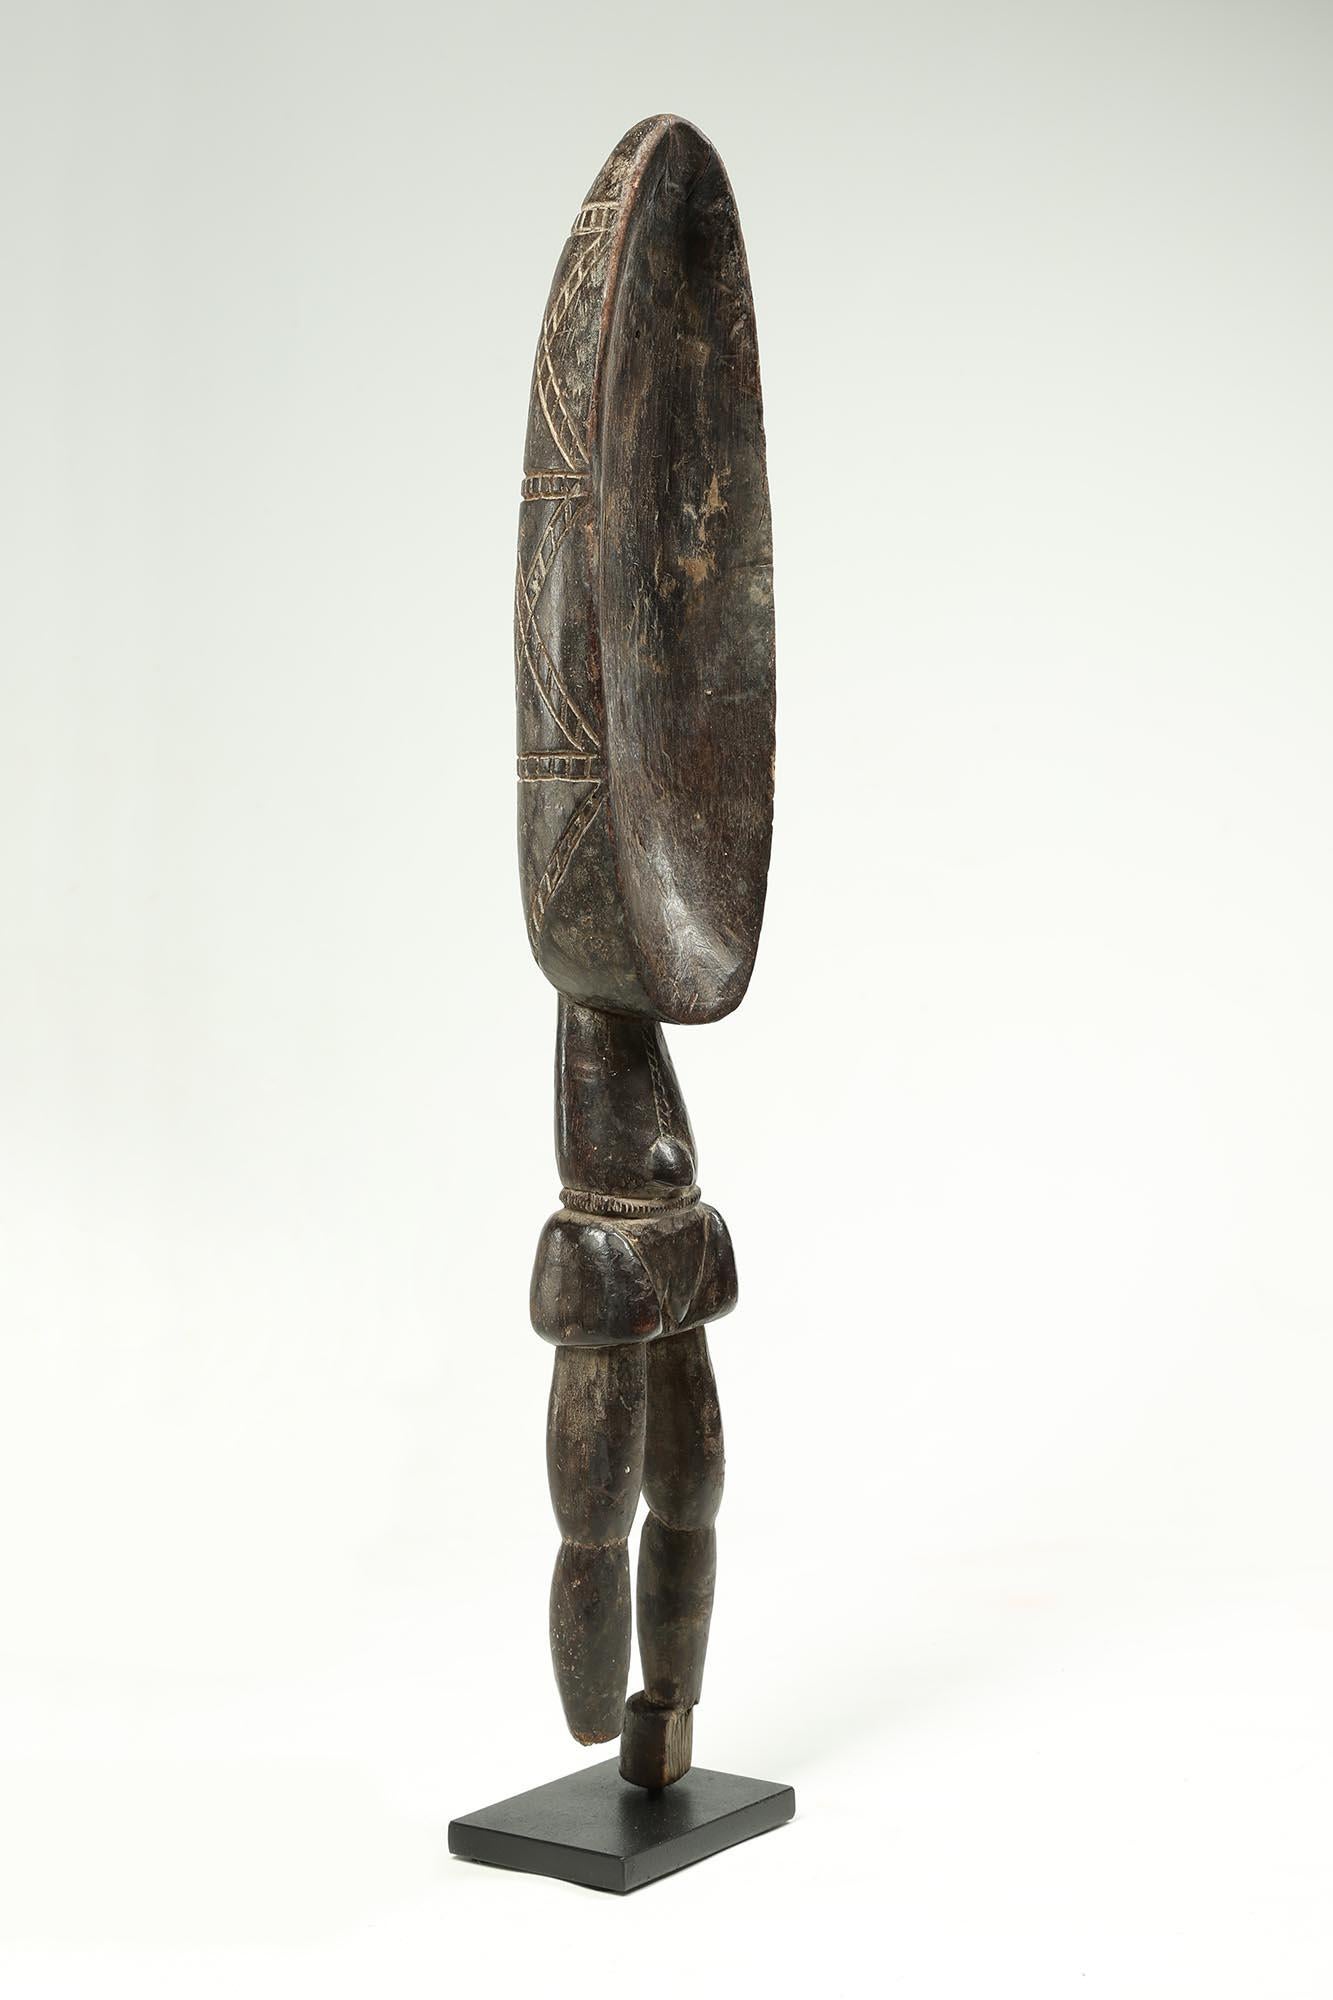 Stylized Human Dan Ritual Wood Serving Spoon, Ivory Coast, Africa In Fair Condition For Sale In Santa Fe, NM